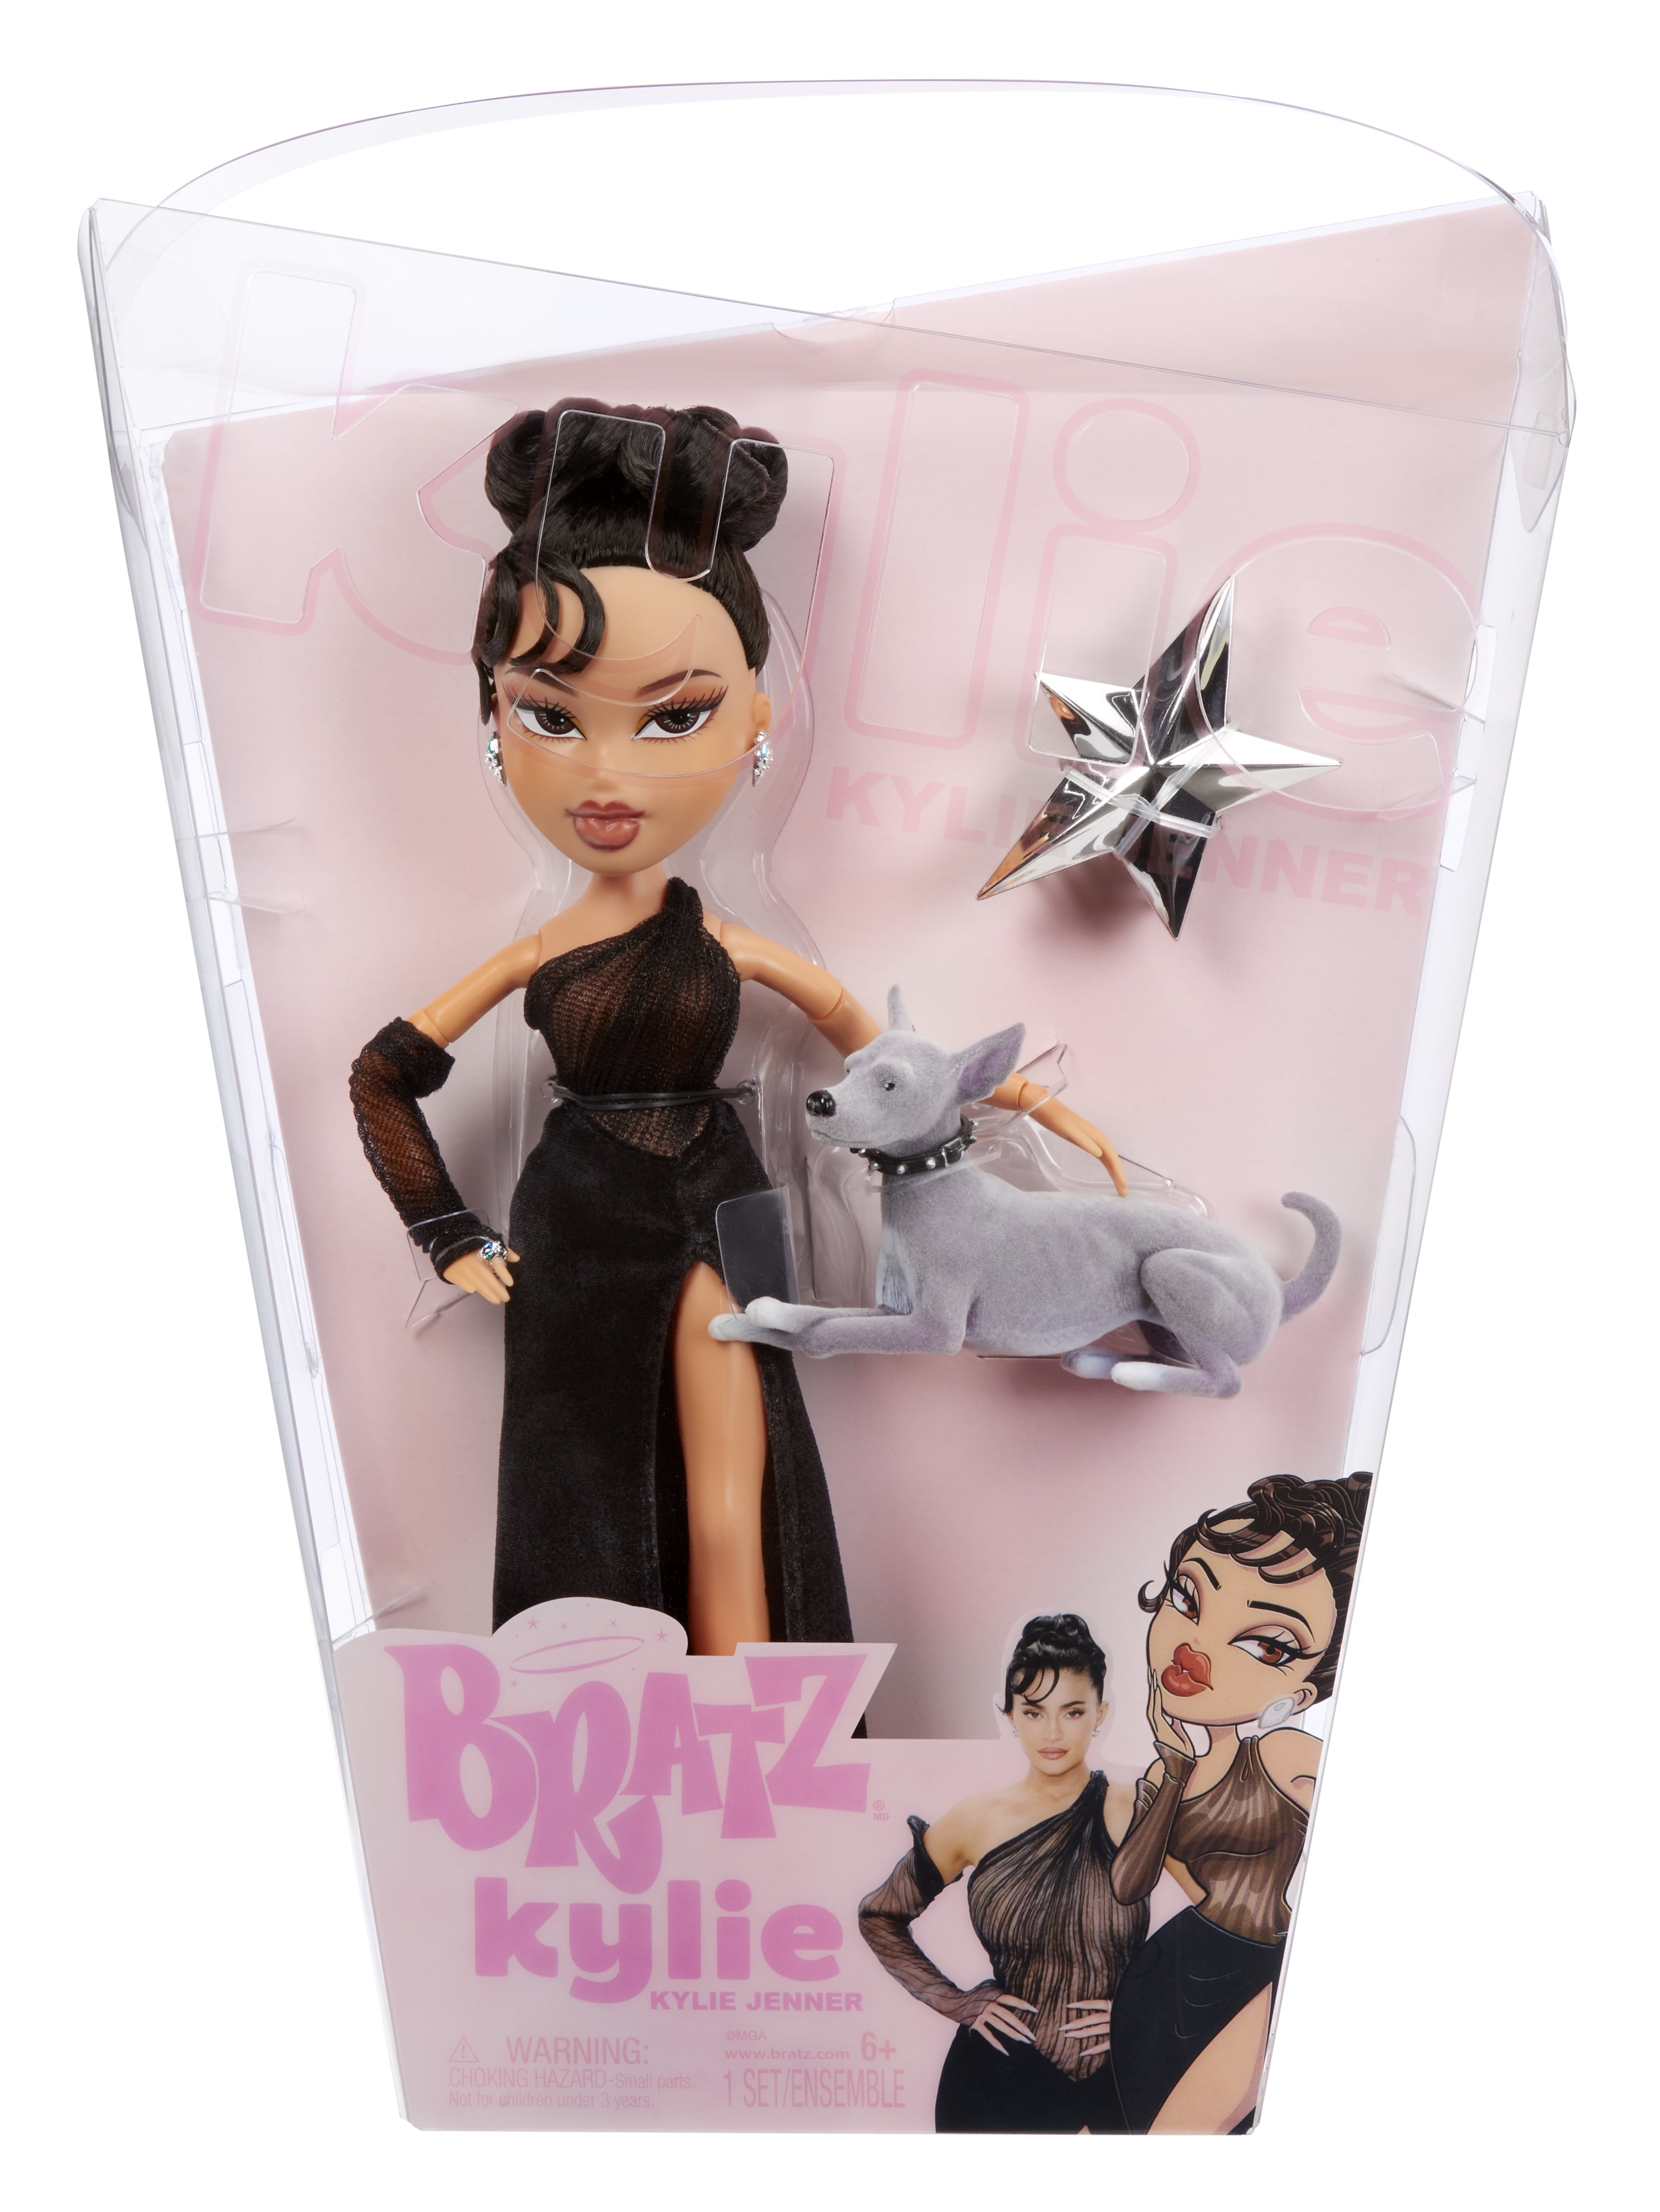 Bratz X Kylie Jenner Night Fashion Doll with Pet Dog and Poster